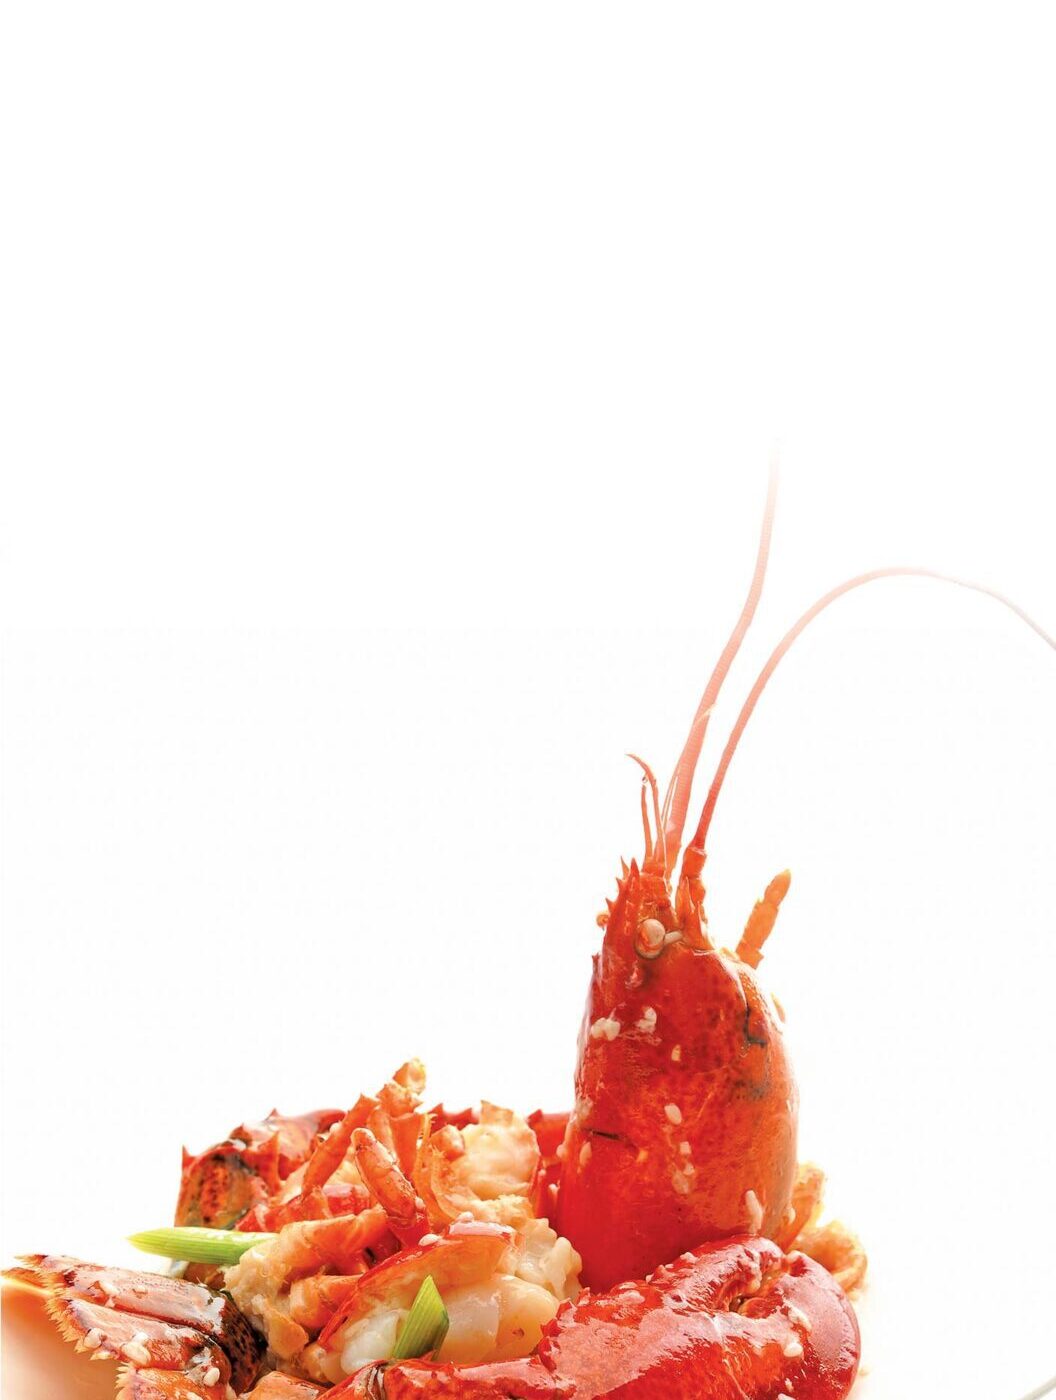 Wok-baked Lobster with Superior Stock